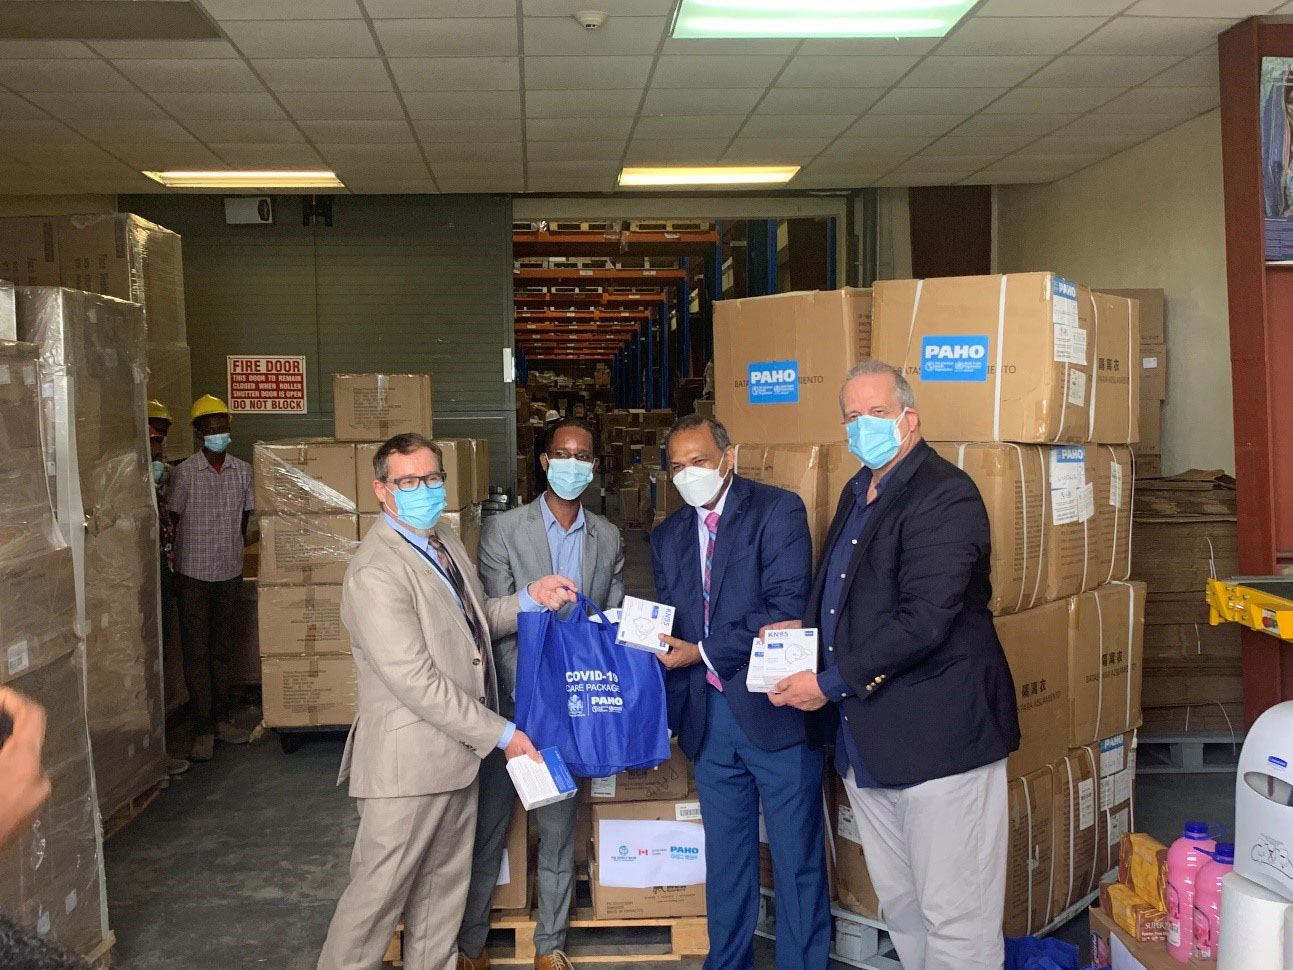 Pandemic supplies donated by Canada, PAHO - Stabroek News